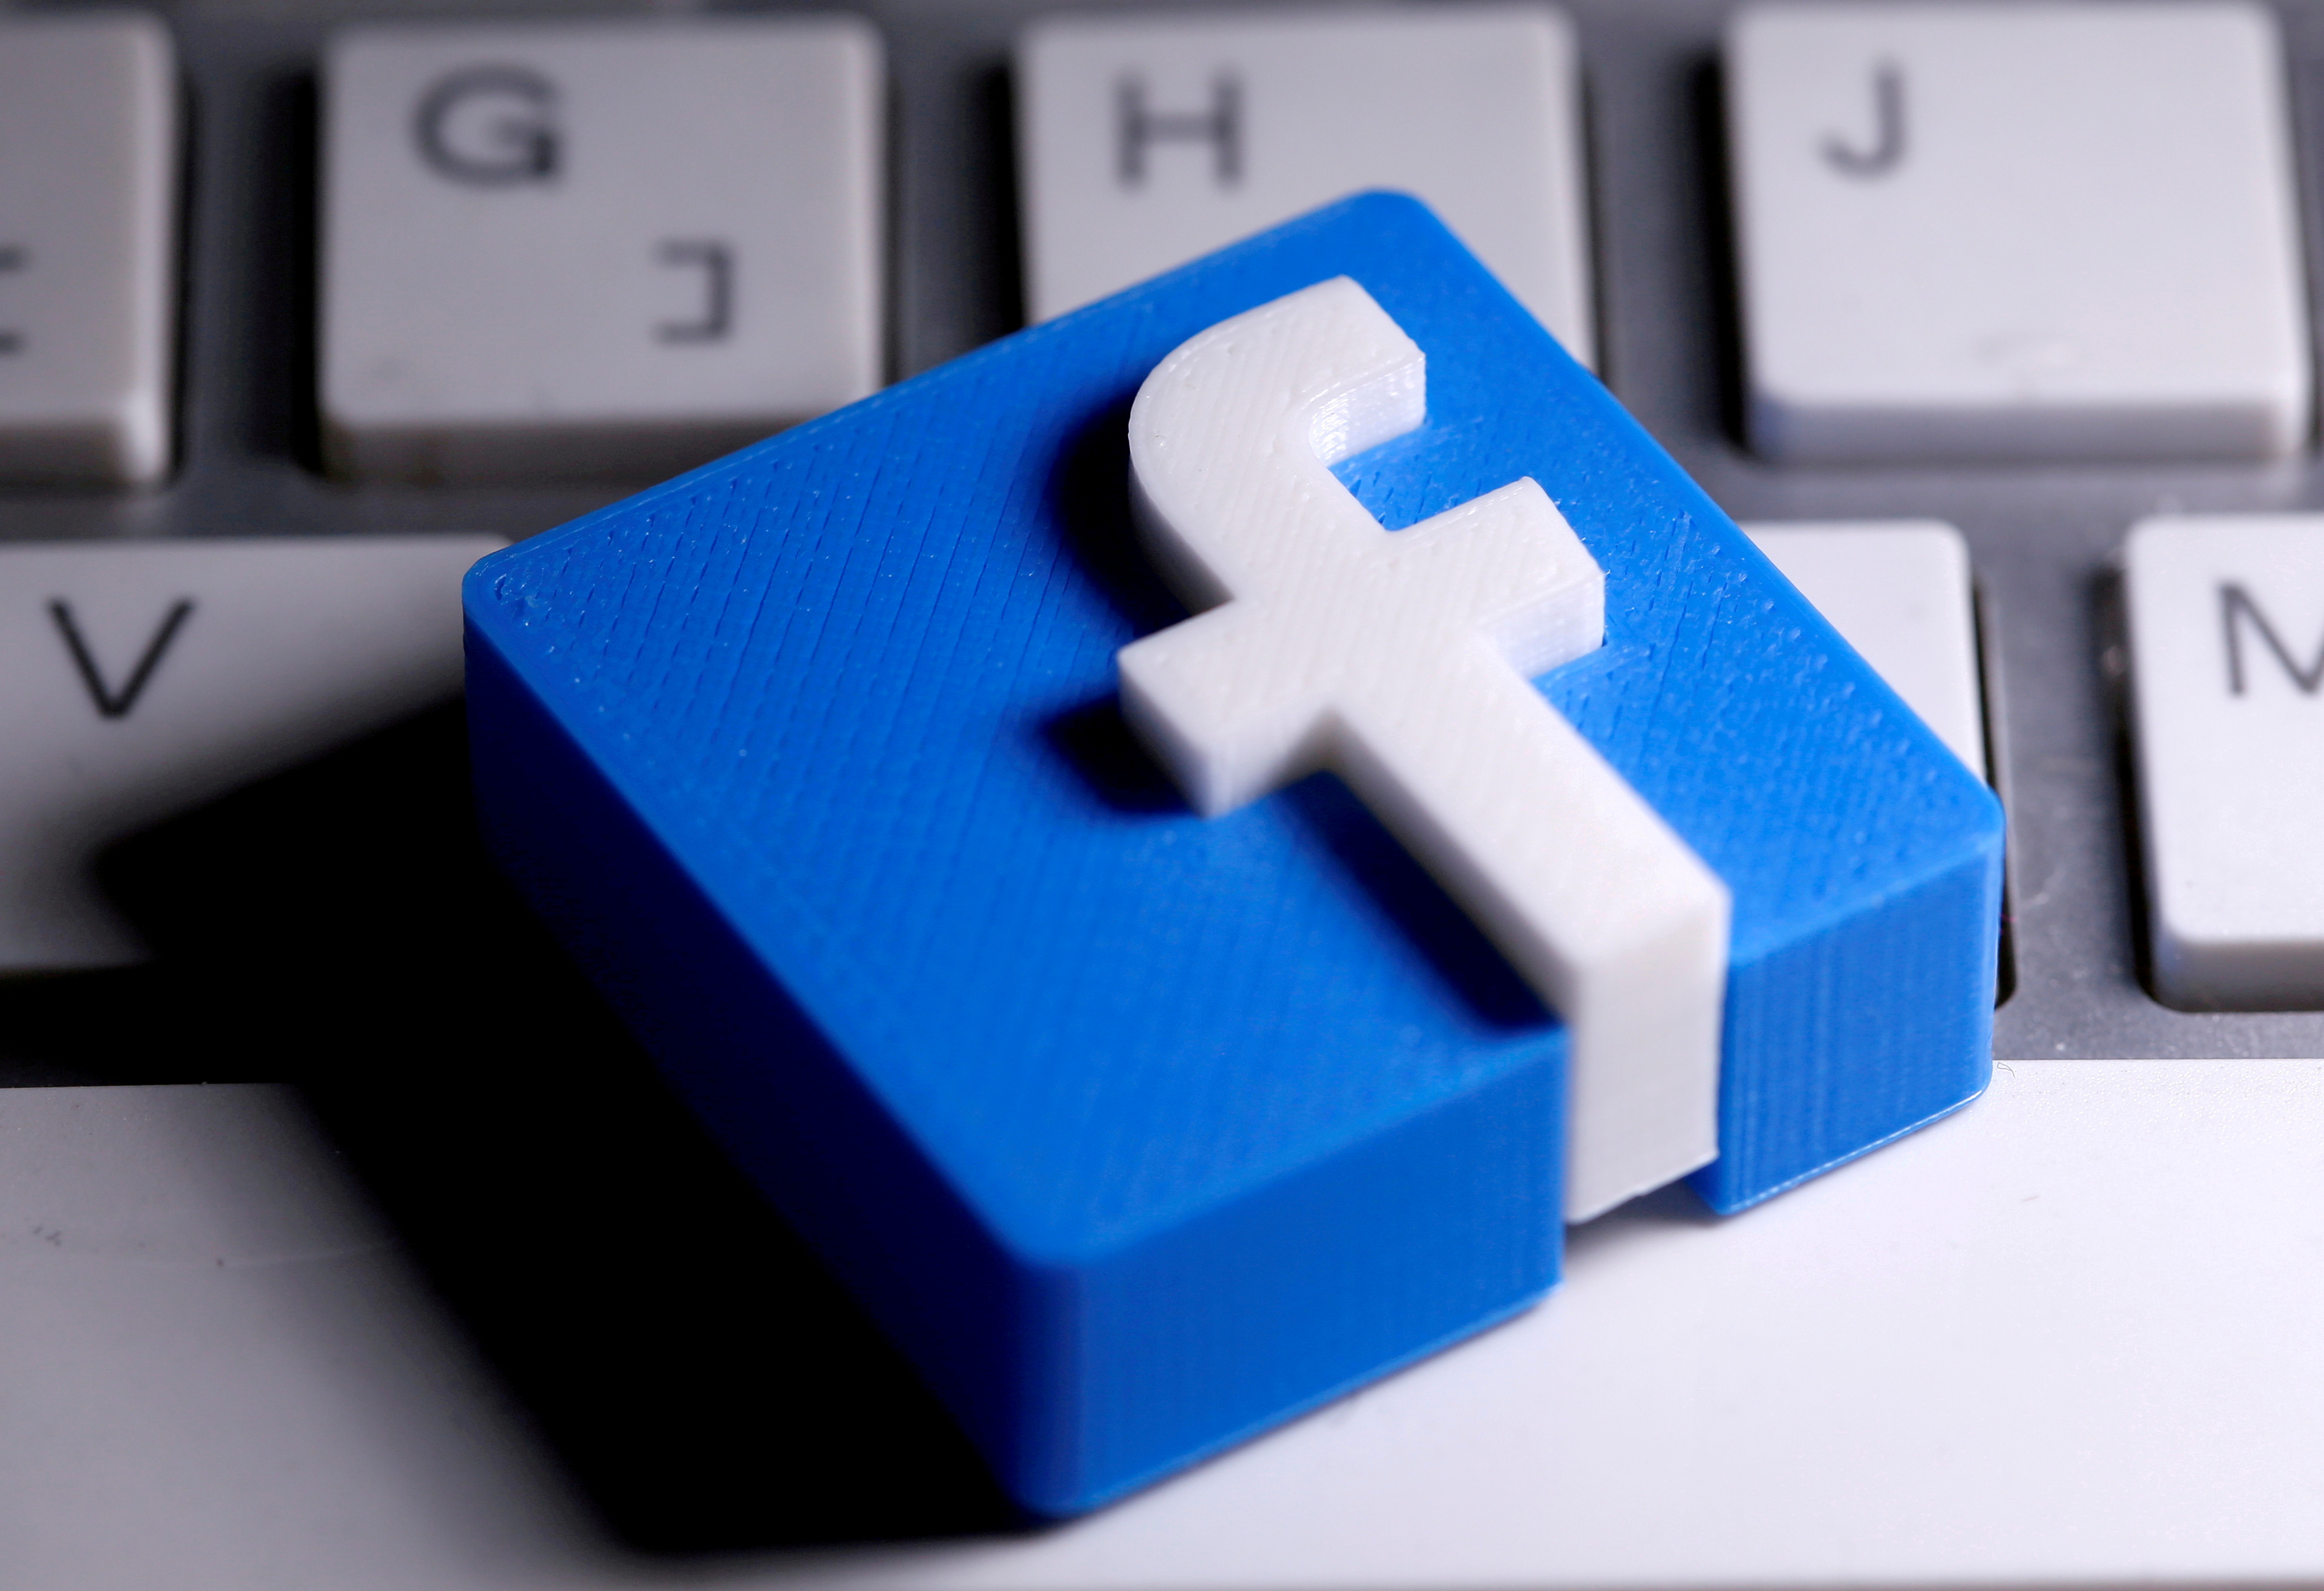 3D-printed Facebook logo is seen placed on a keyboard in this illustration taken March 25, 2020. REUTERS/Dado Ruvic/Illustration